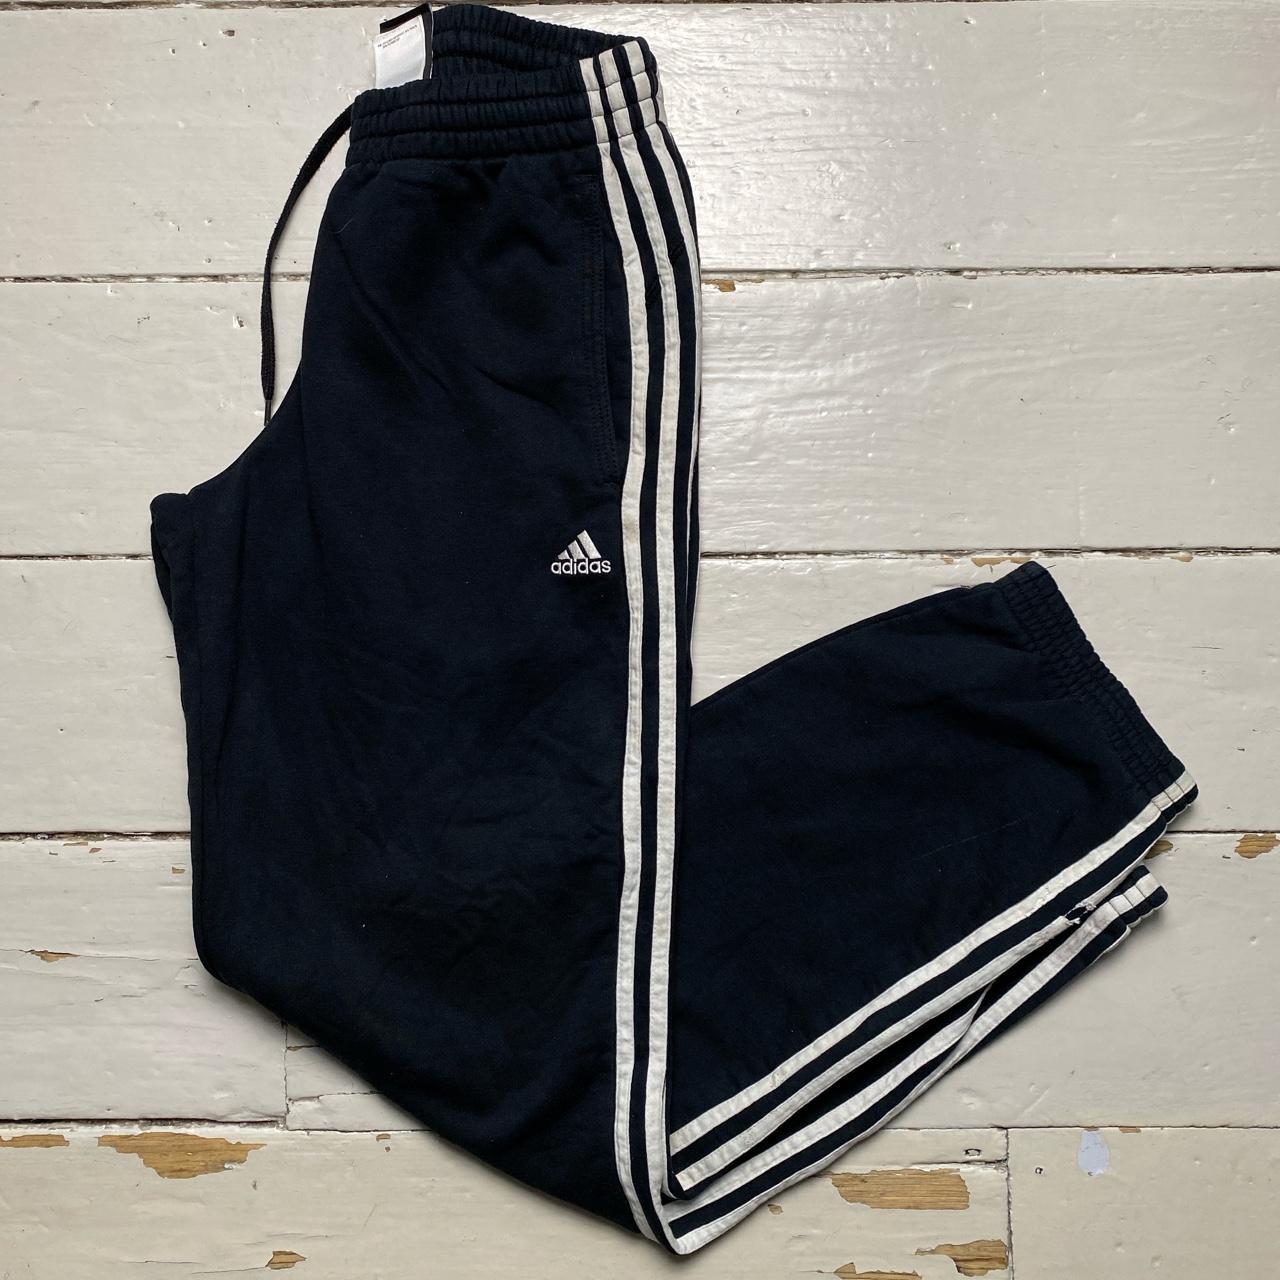 Adidas Performance Essentials Joggers Black and White